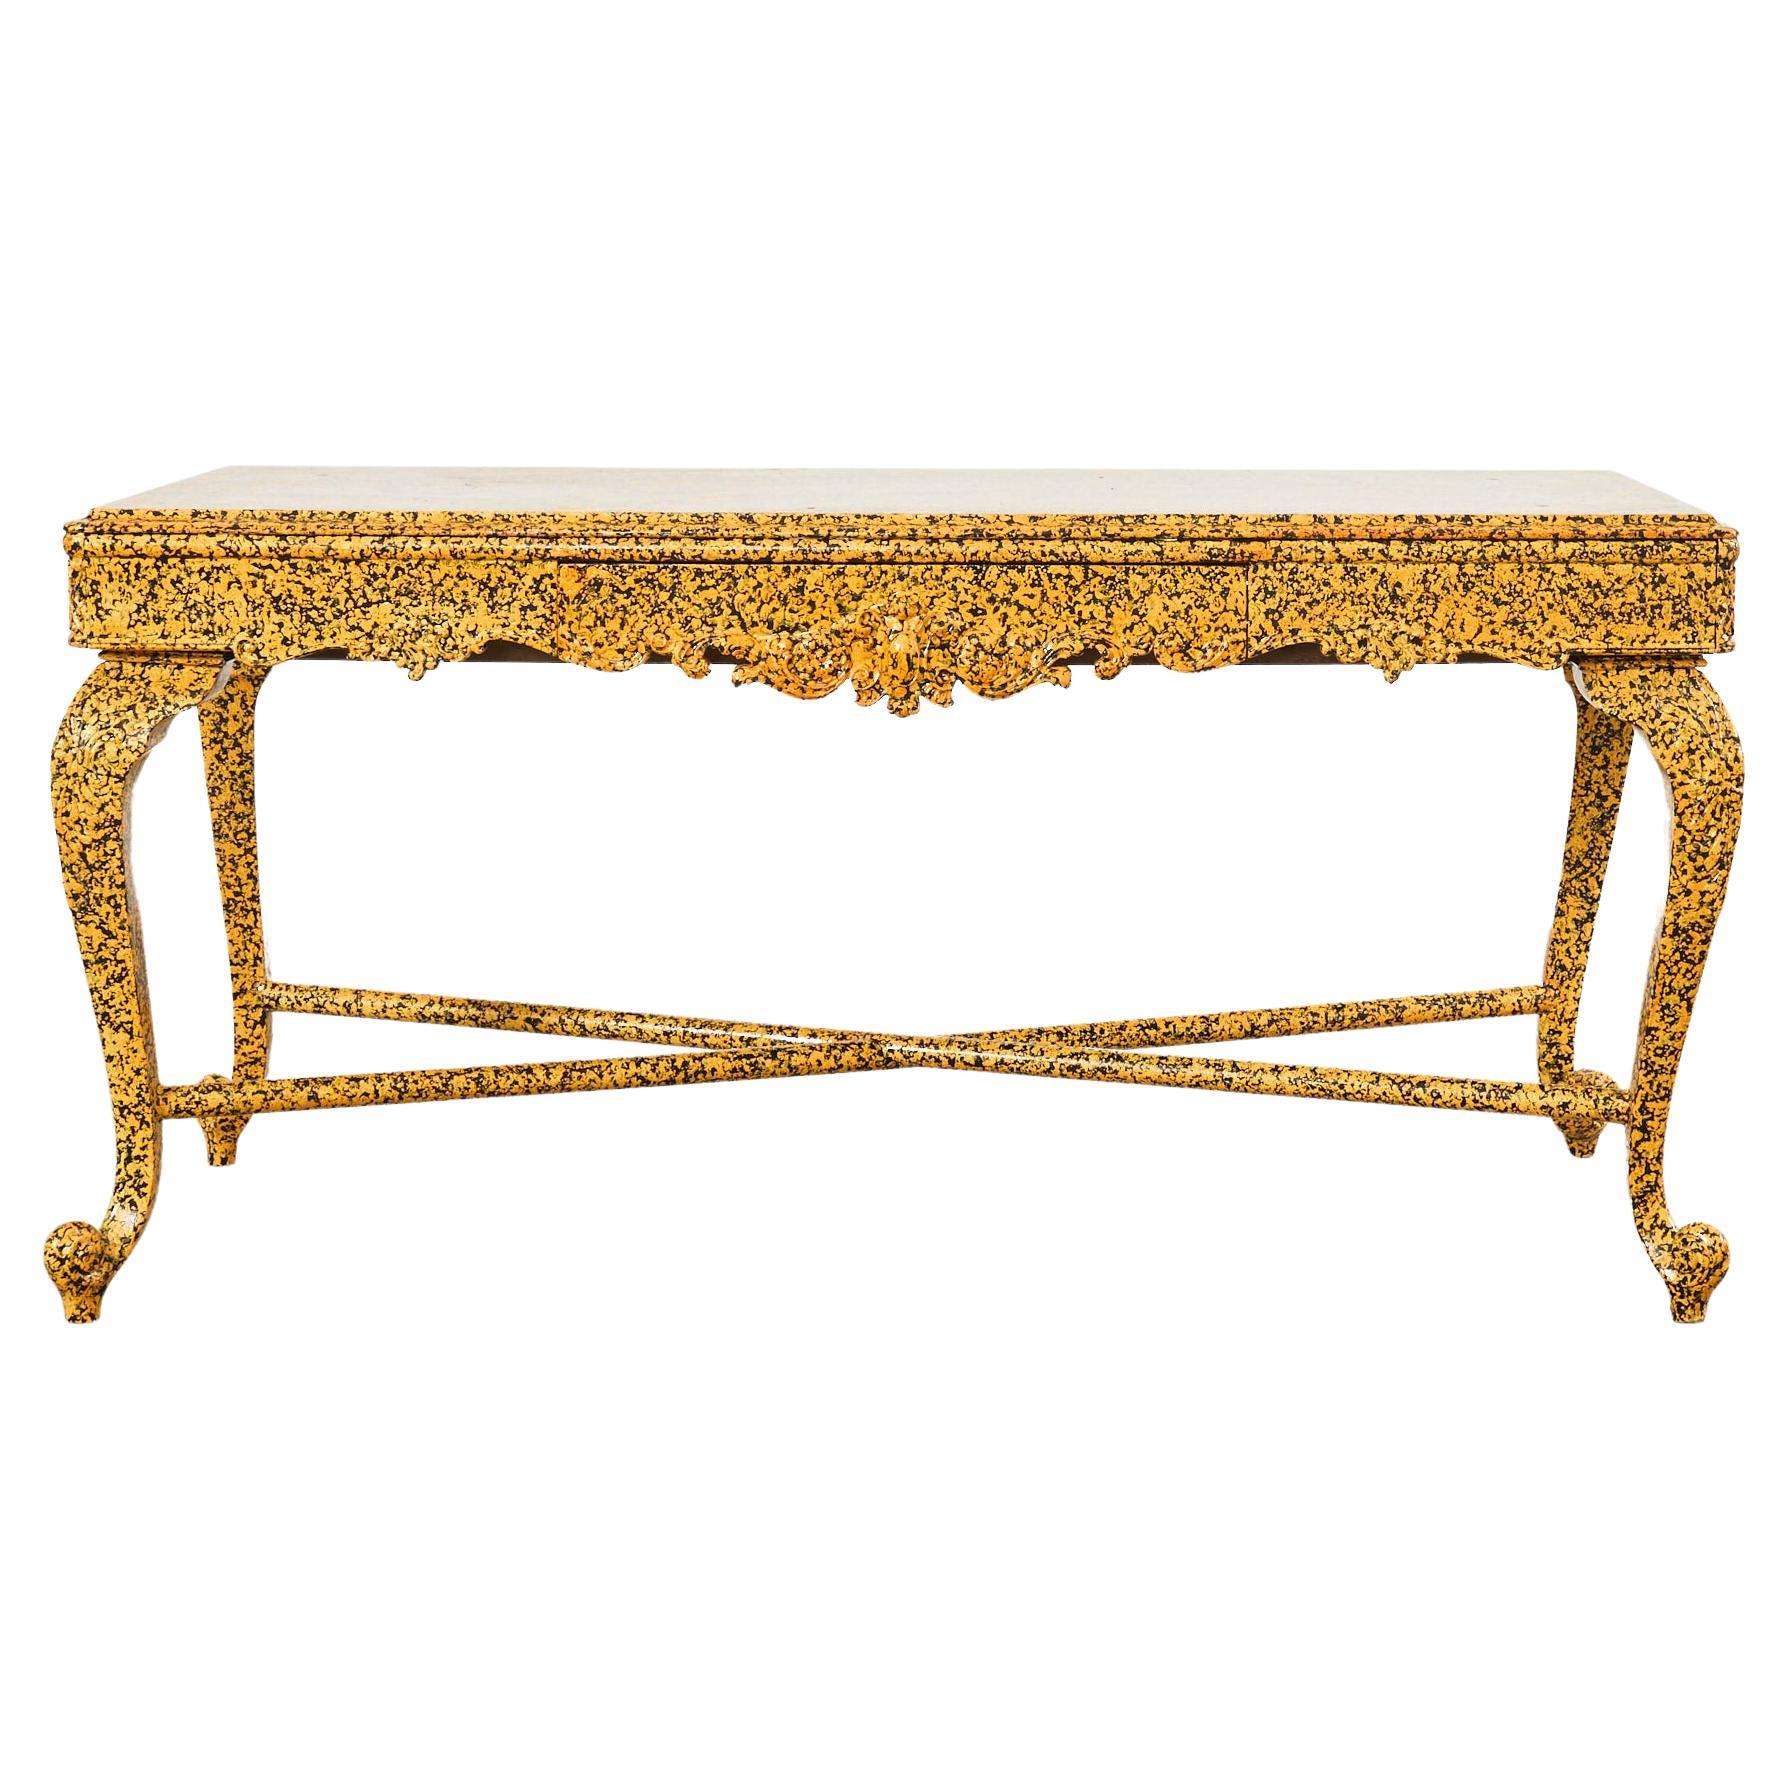 English Regency Style Spreckled Console by Artist Ira Yeager For Sale